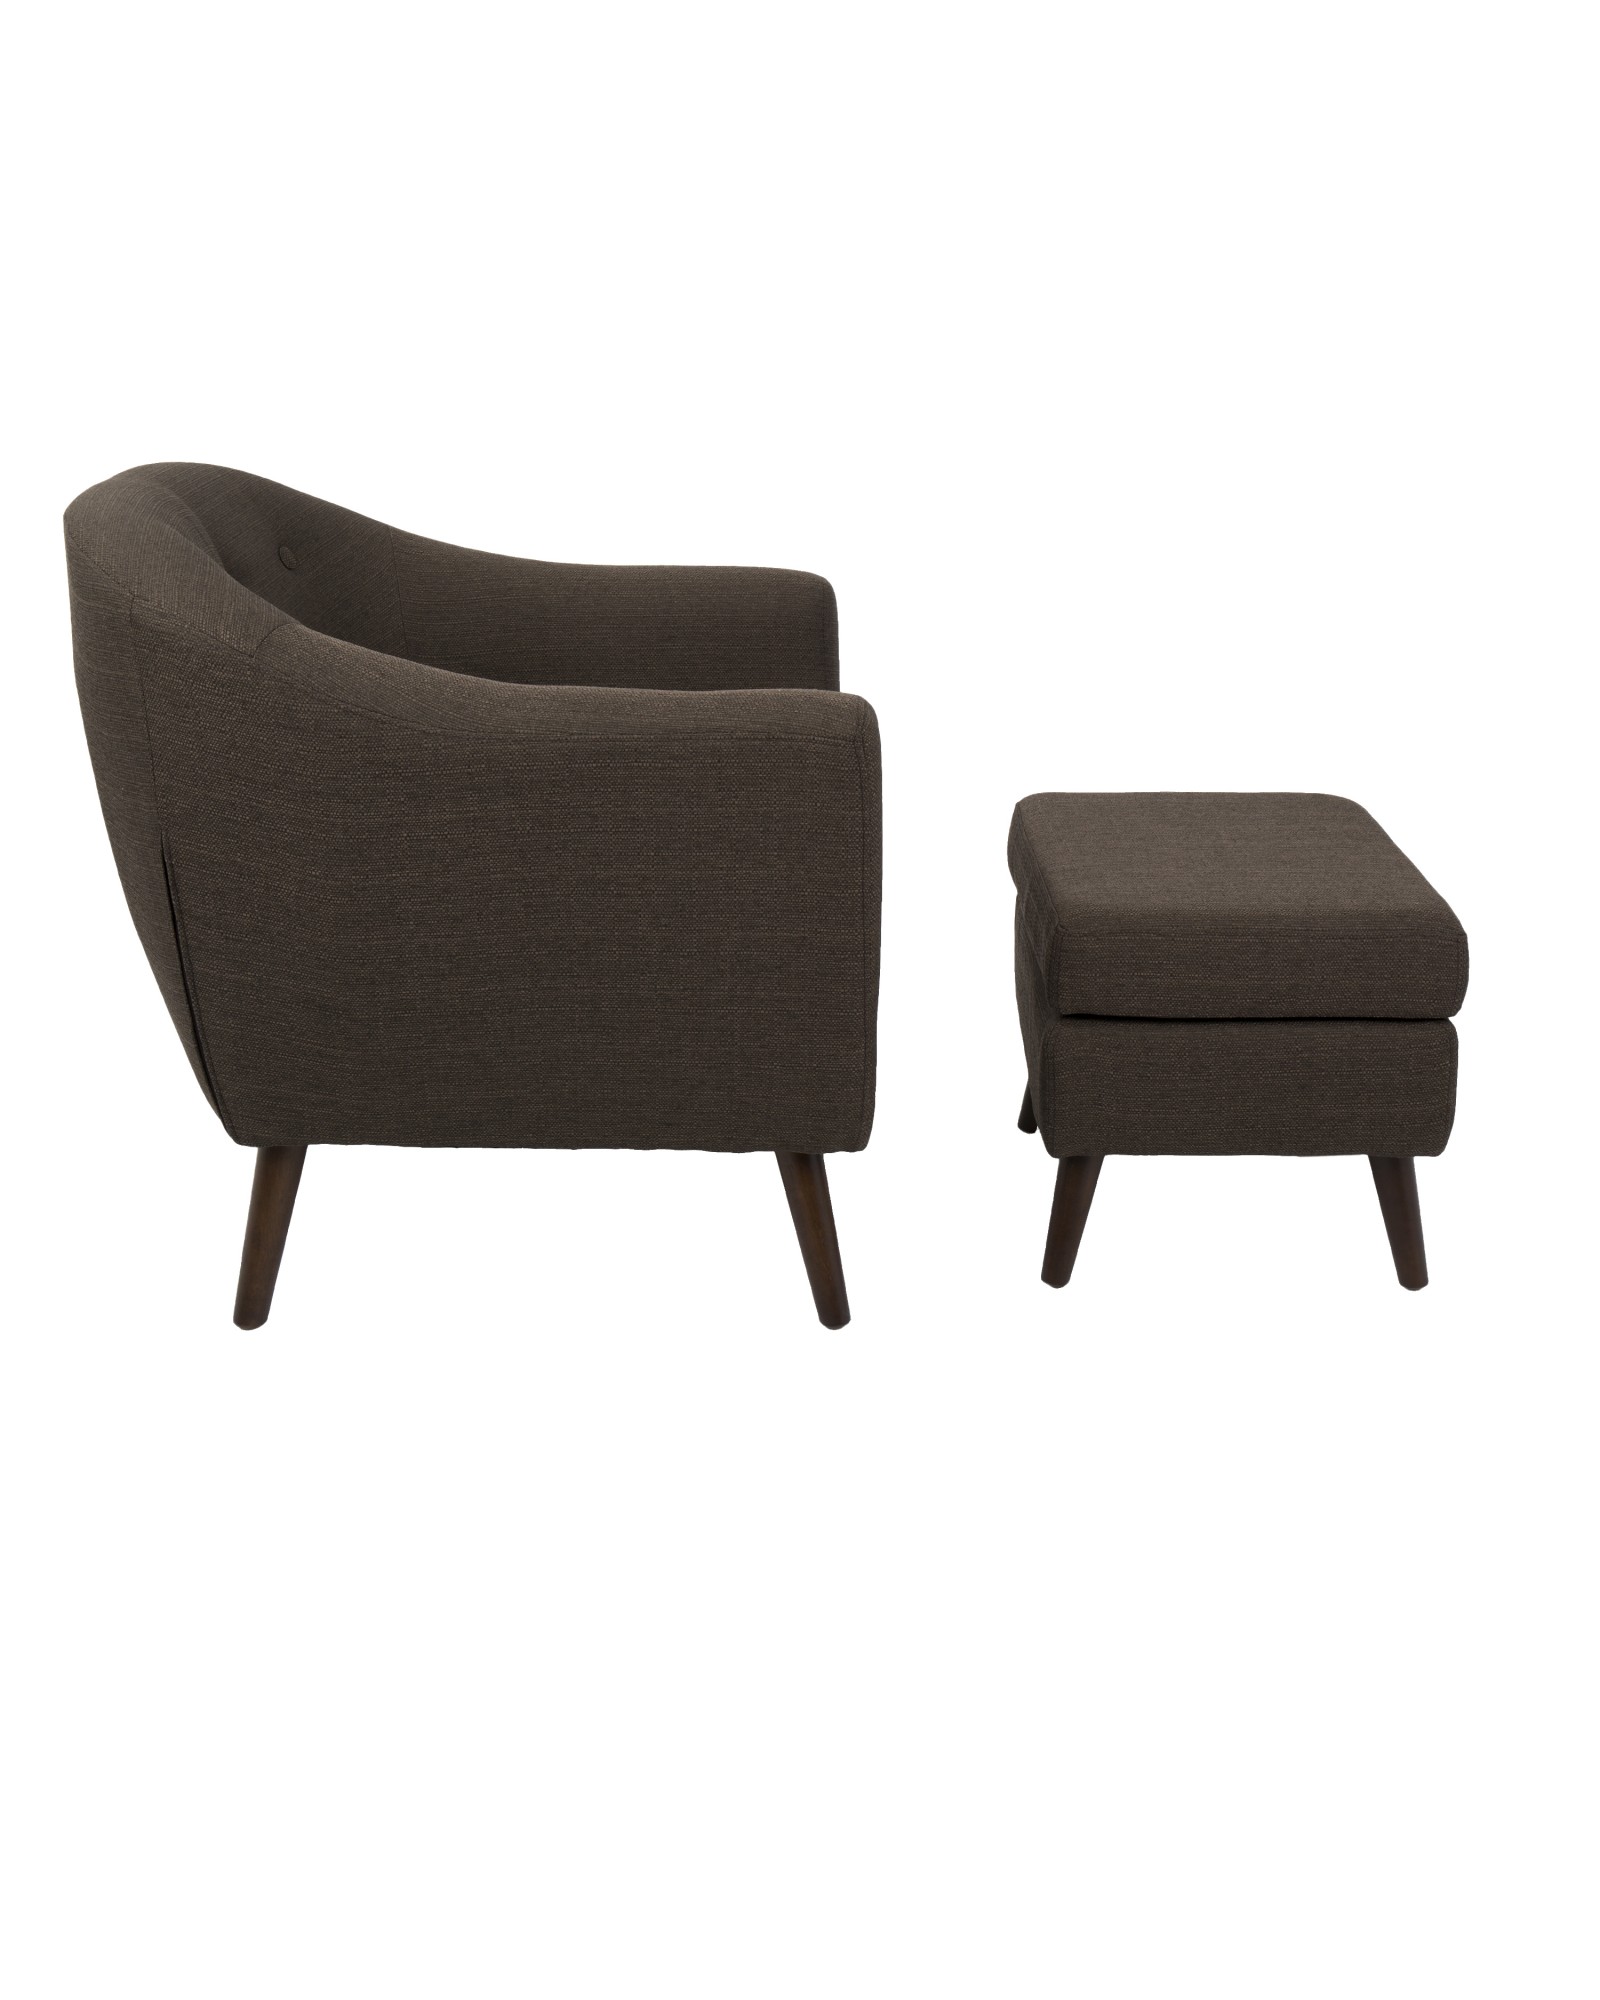 Rockwell Mid-Century Modern Accent Chair and Ottoman in Espresso